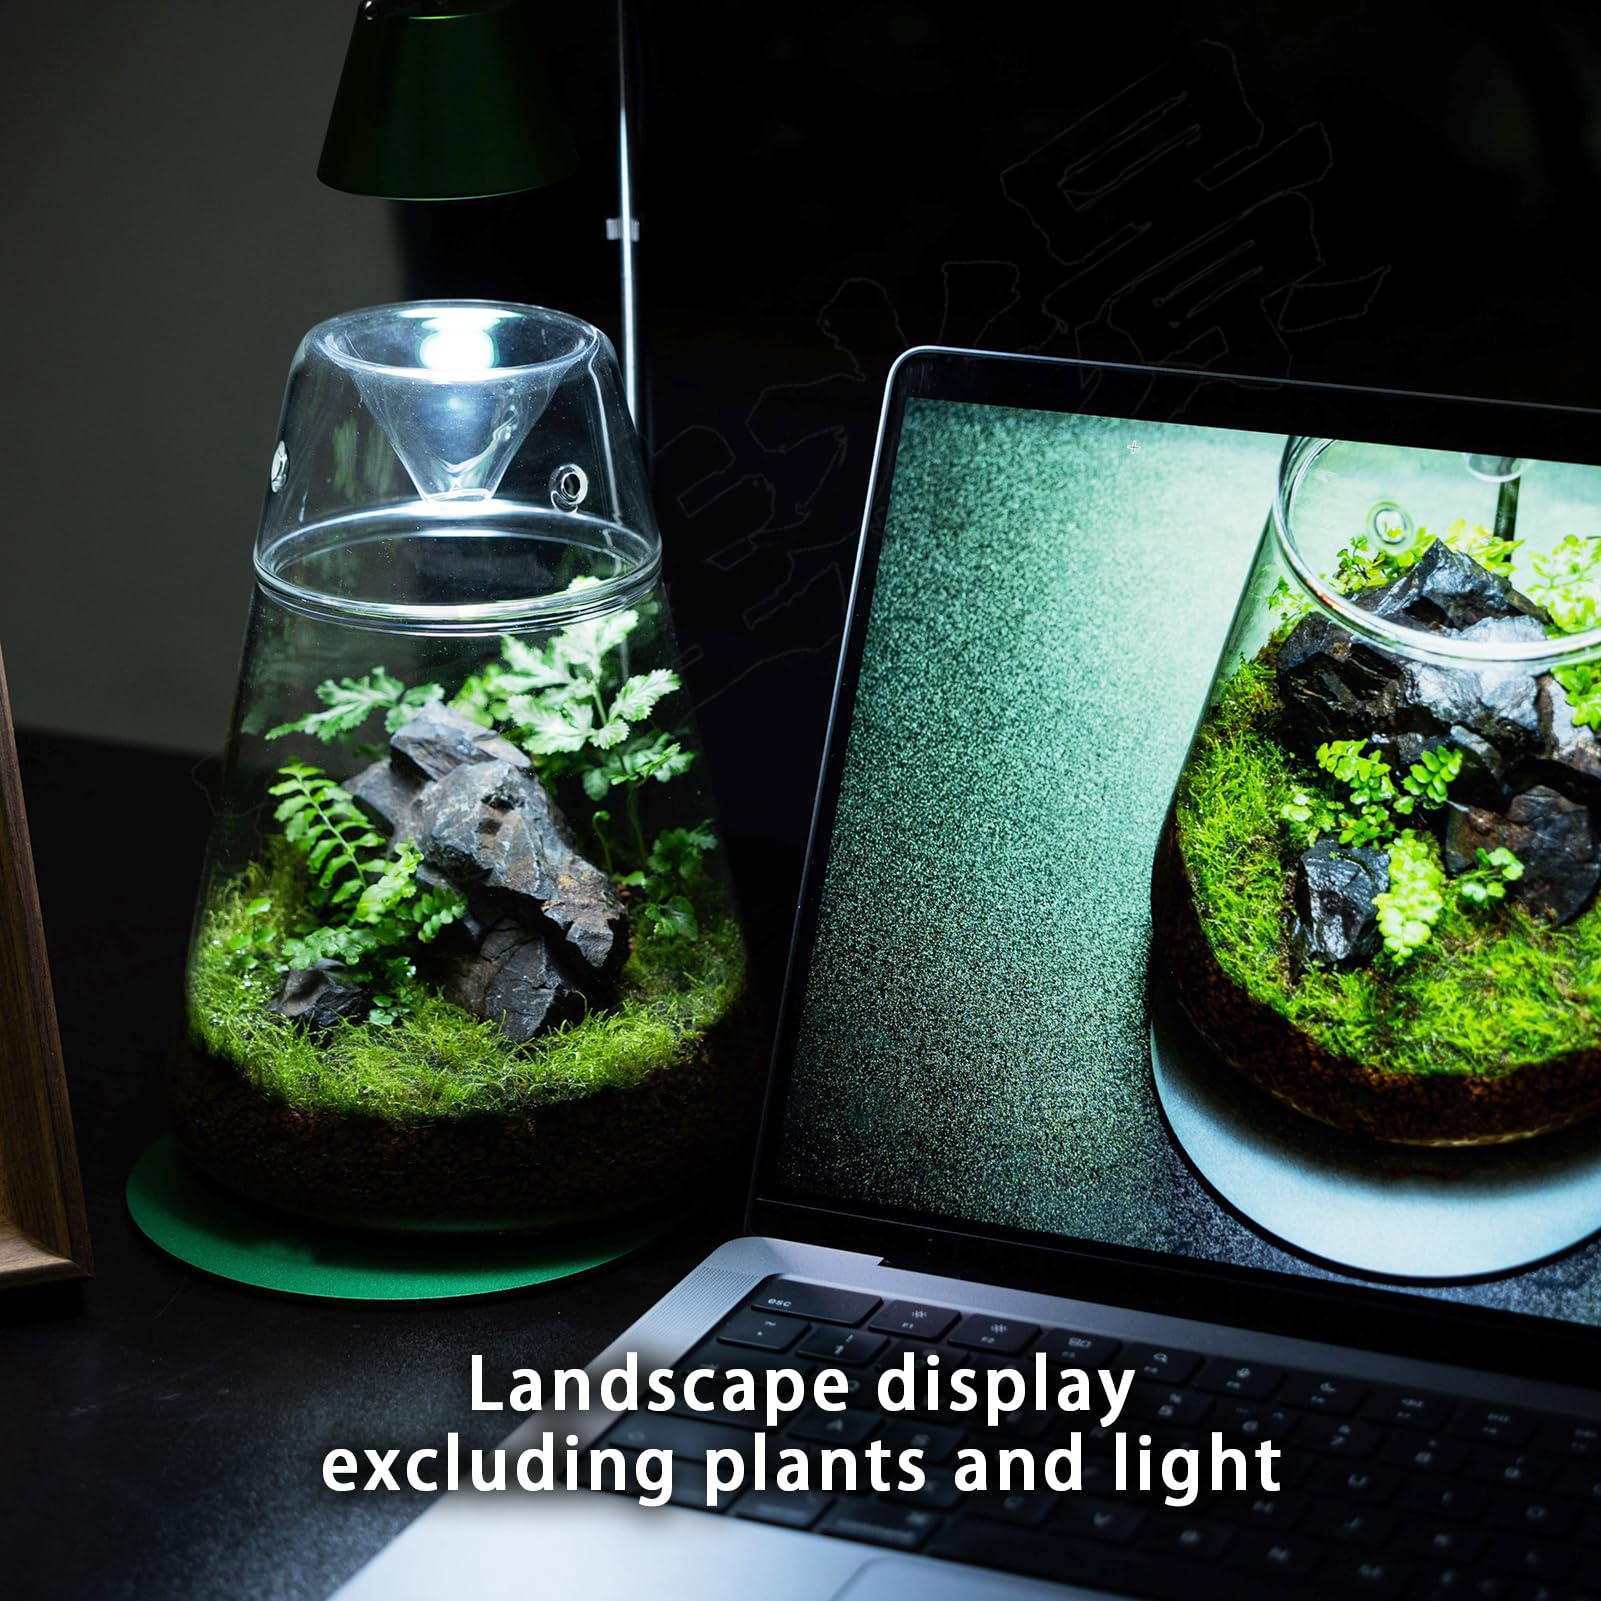 Glass Plant Terrarium with Lid 6.3"X7.9" Inches Succulent Air Planter Fern Moss Micro-Landscape Vase for Home Office Tabletop Decoration Container Indoor Wardian Copyright Patent - Plantonio